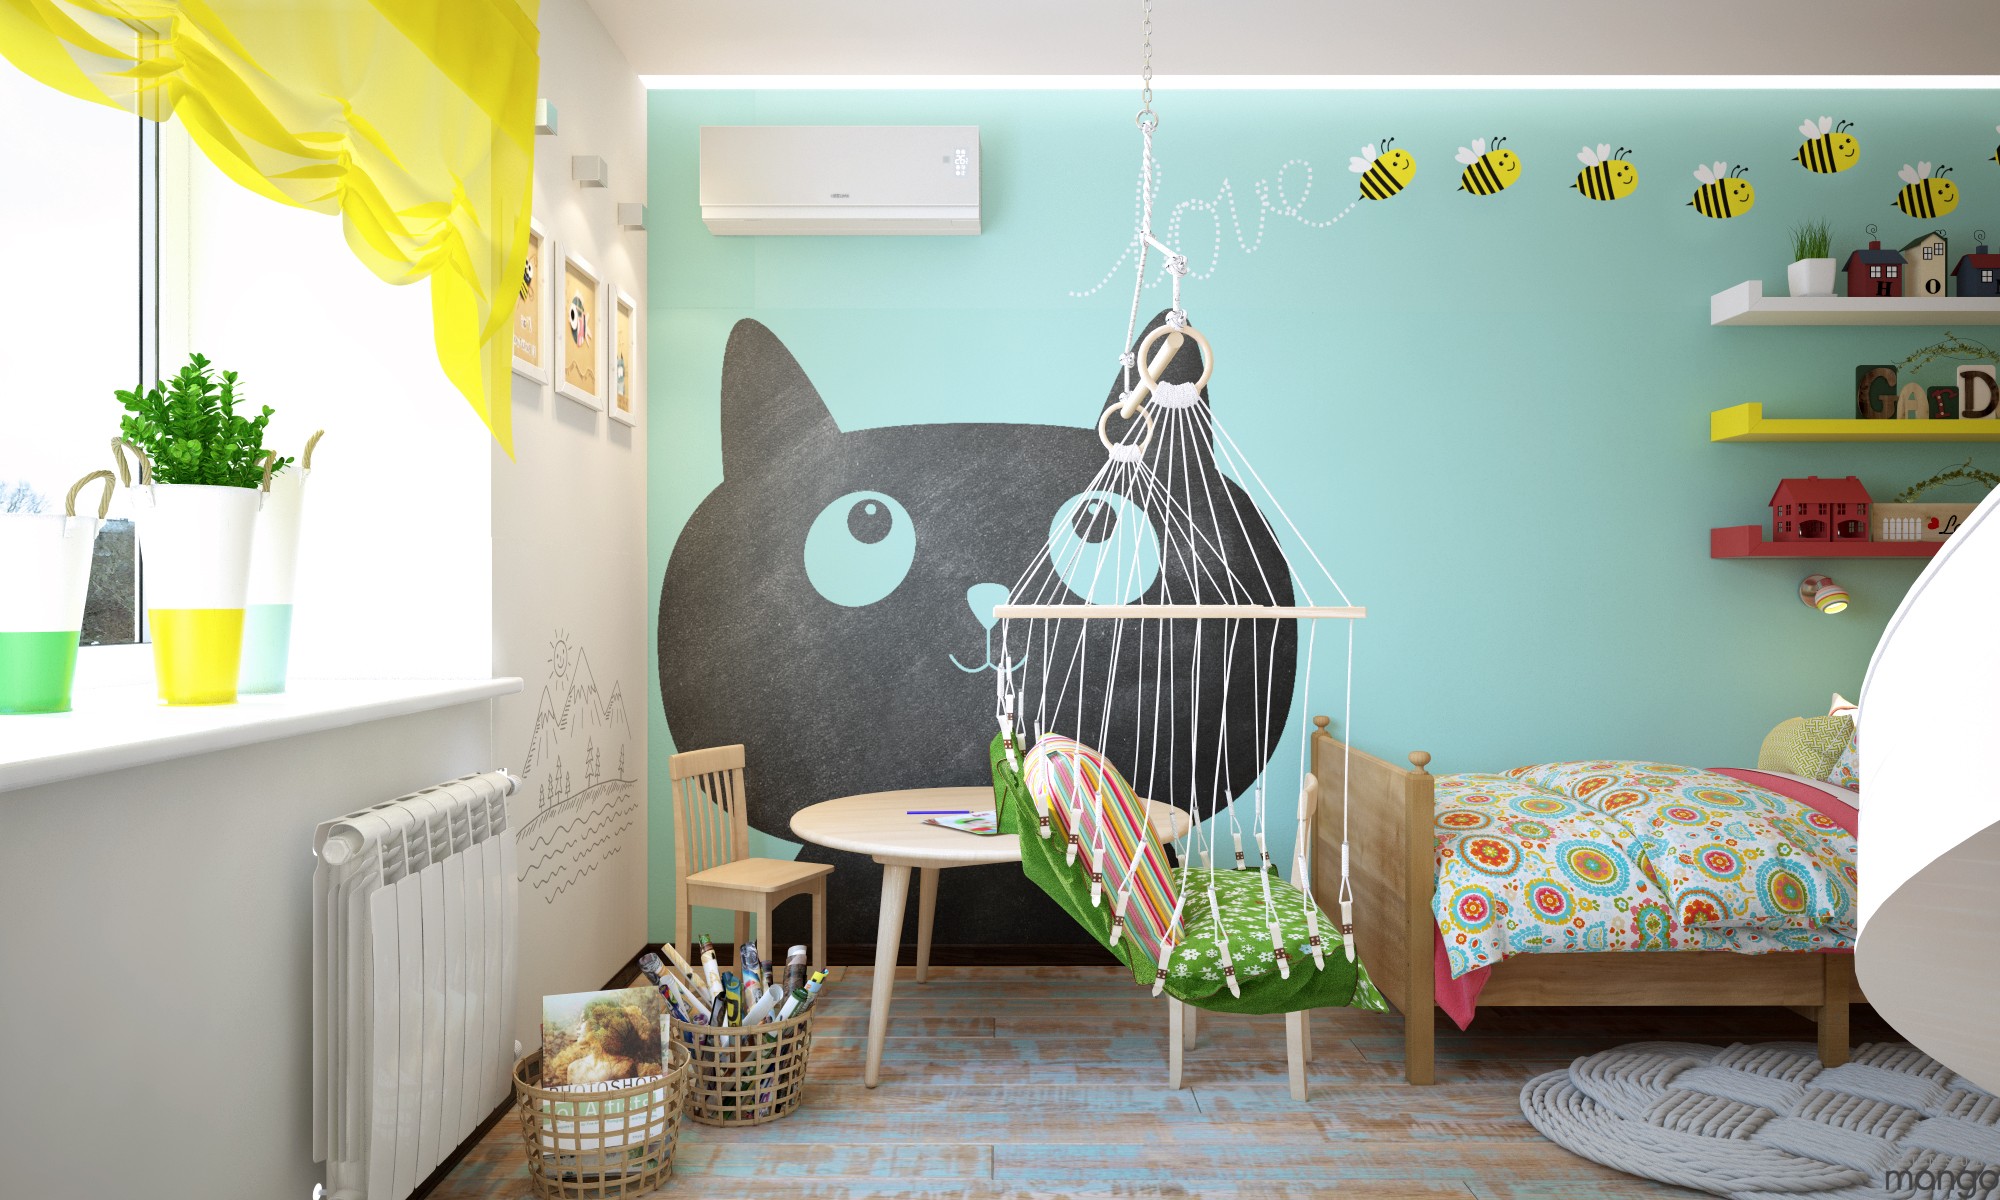 cute nursery design "width =" 2000 "height =" 1200 "srcset =" https://mileray.com/wp-content/uploads/2020/05/1588508730_643_Variety-of-Kids-Room-Decorating-Ideas-Which-Apply-With-a.jpg 2000w, https: / / mileray.com/wp-content/uploads/2016/11/Design-Studio-Mango9-5-300x180.jpg 300w, https://mileray.com/wp-content/uploads/2016/11/Design-Studio- Mango9 -5-768x461.jpg 768w, https://mileray.com/wp-content/uploads/2016/11/Design-Studio-Mango9-5-1024x614.jpg 1024w, https://mileray.com/wp- content / uploads / 2016/11 / Design-Studio-Mango9-5-696x418.jpg 696w, https://mileray.com/wp-content/uploads/2016/11/Design-Studio-Mango9-5-1068x641.jpg 1068w , https://mileray.com/wp-content/uploads/2016/11/Design-Studio-Mango9-5-700x420.jpg 700w "sizes =" (maximum width: 2000px) 100vw, 2000px